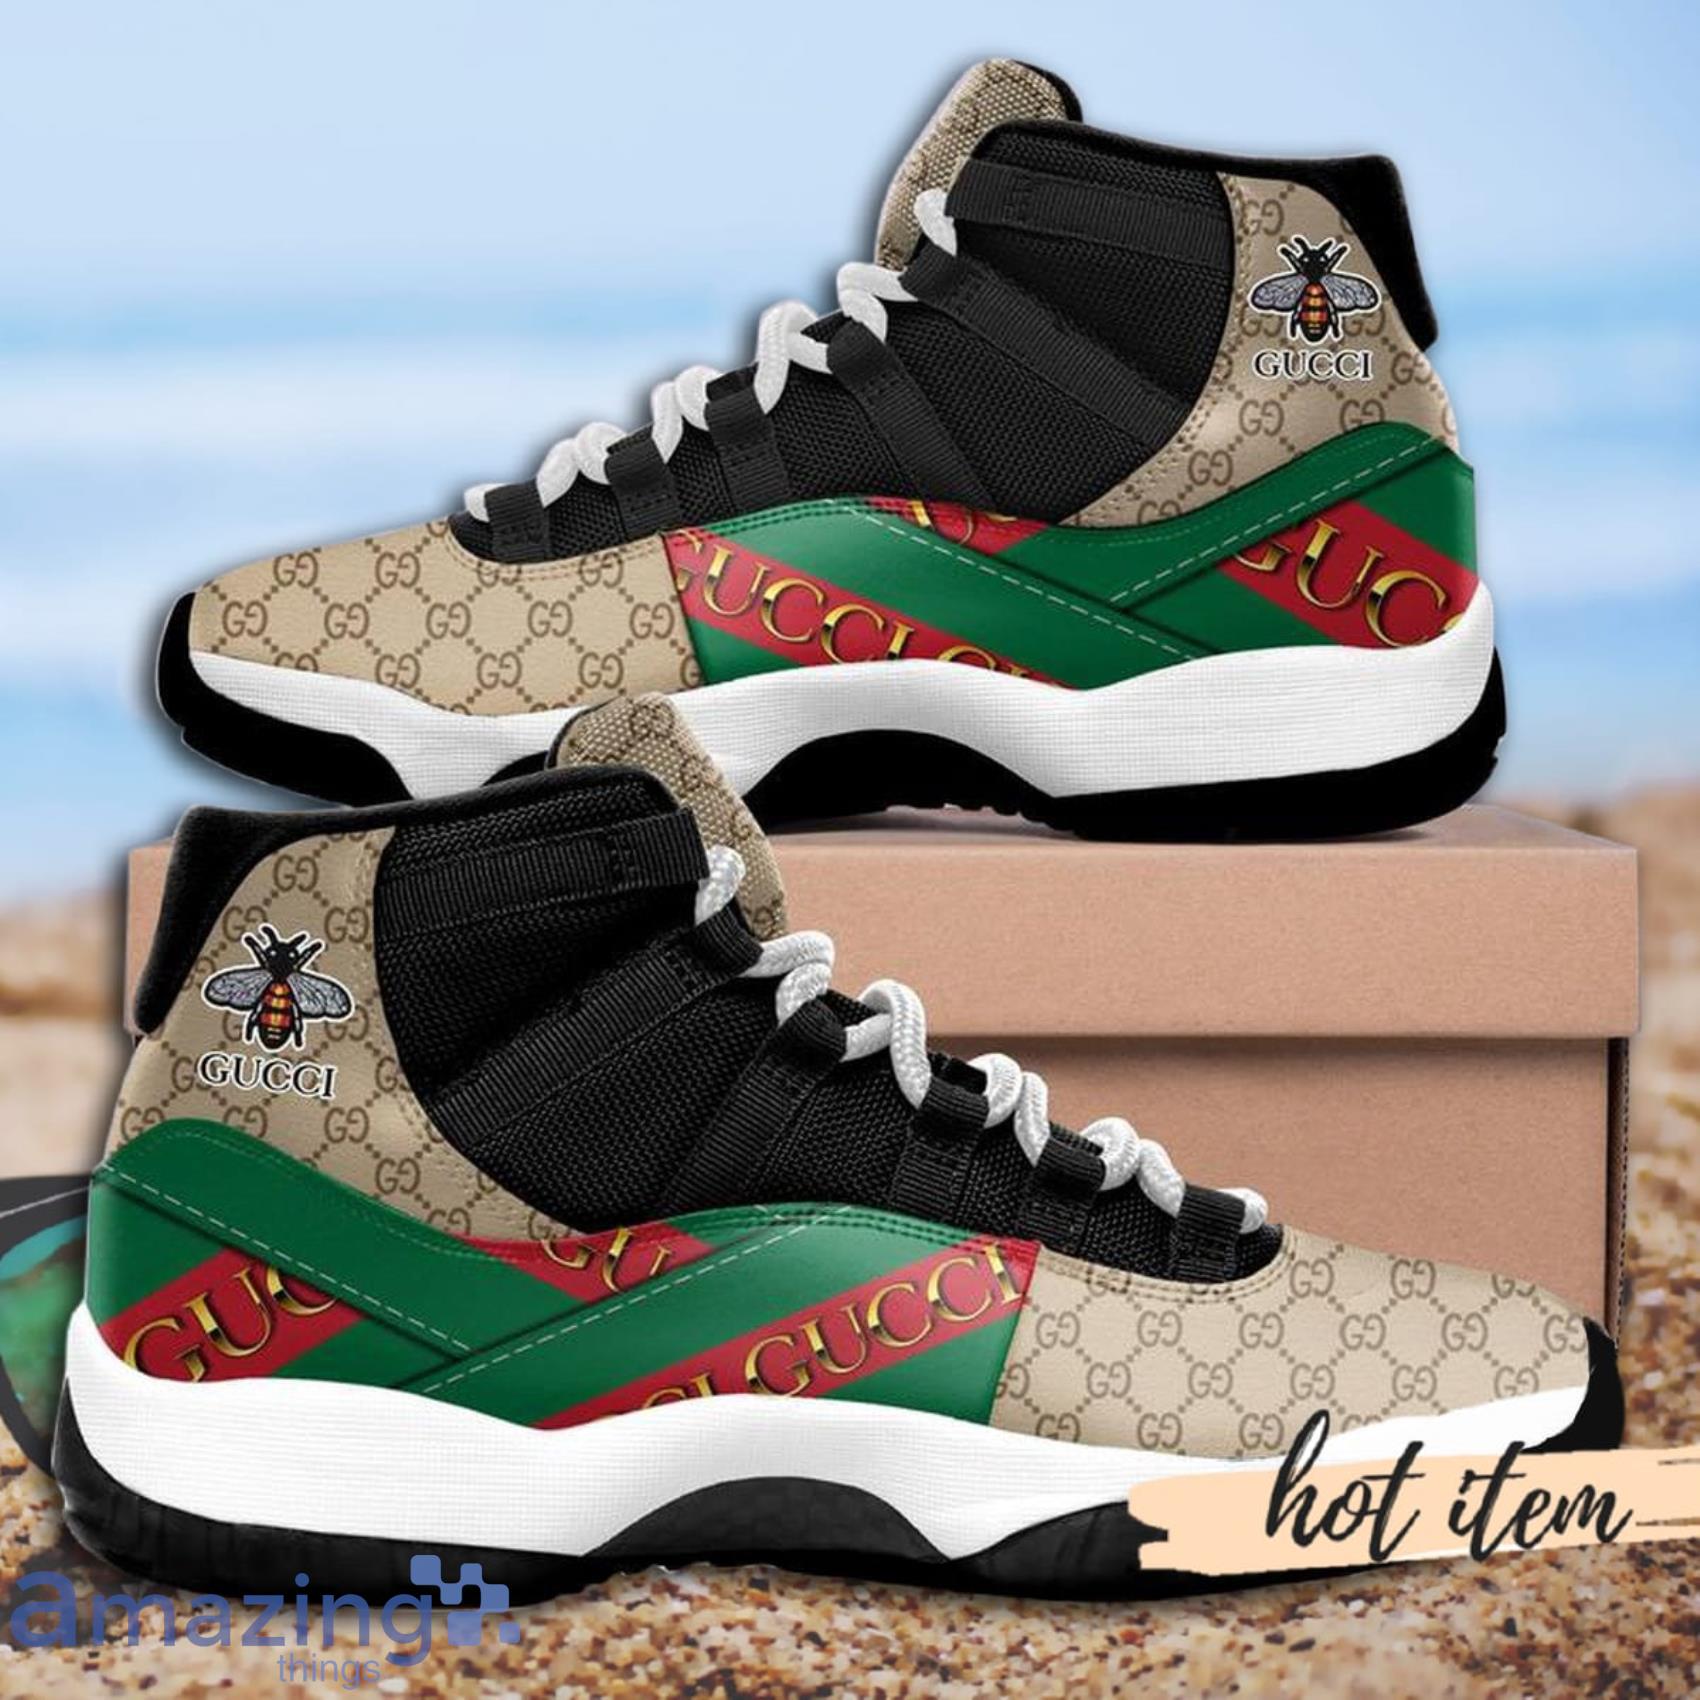 Luxury Gucci Bee Air Jordan 11 Shoes Gucci Sneakers Gifts For Men